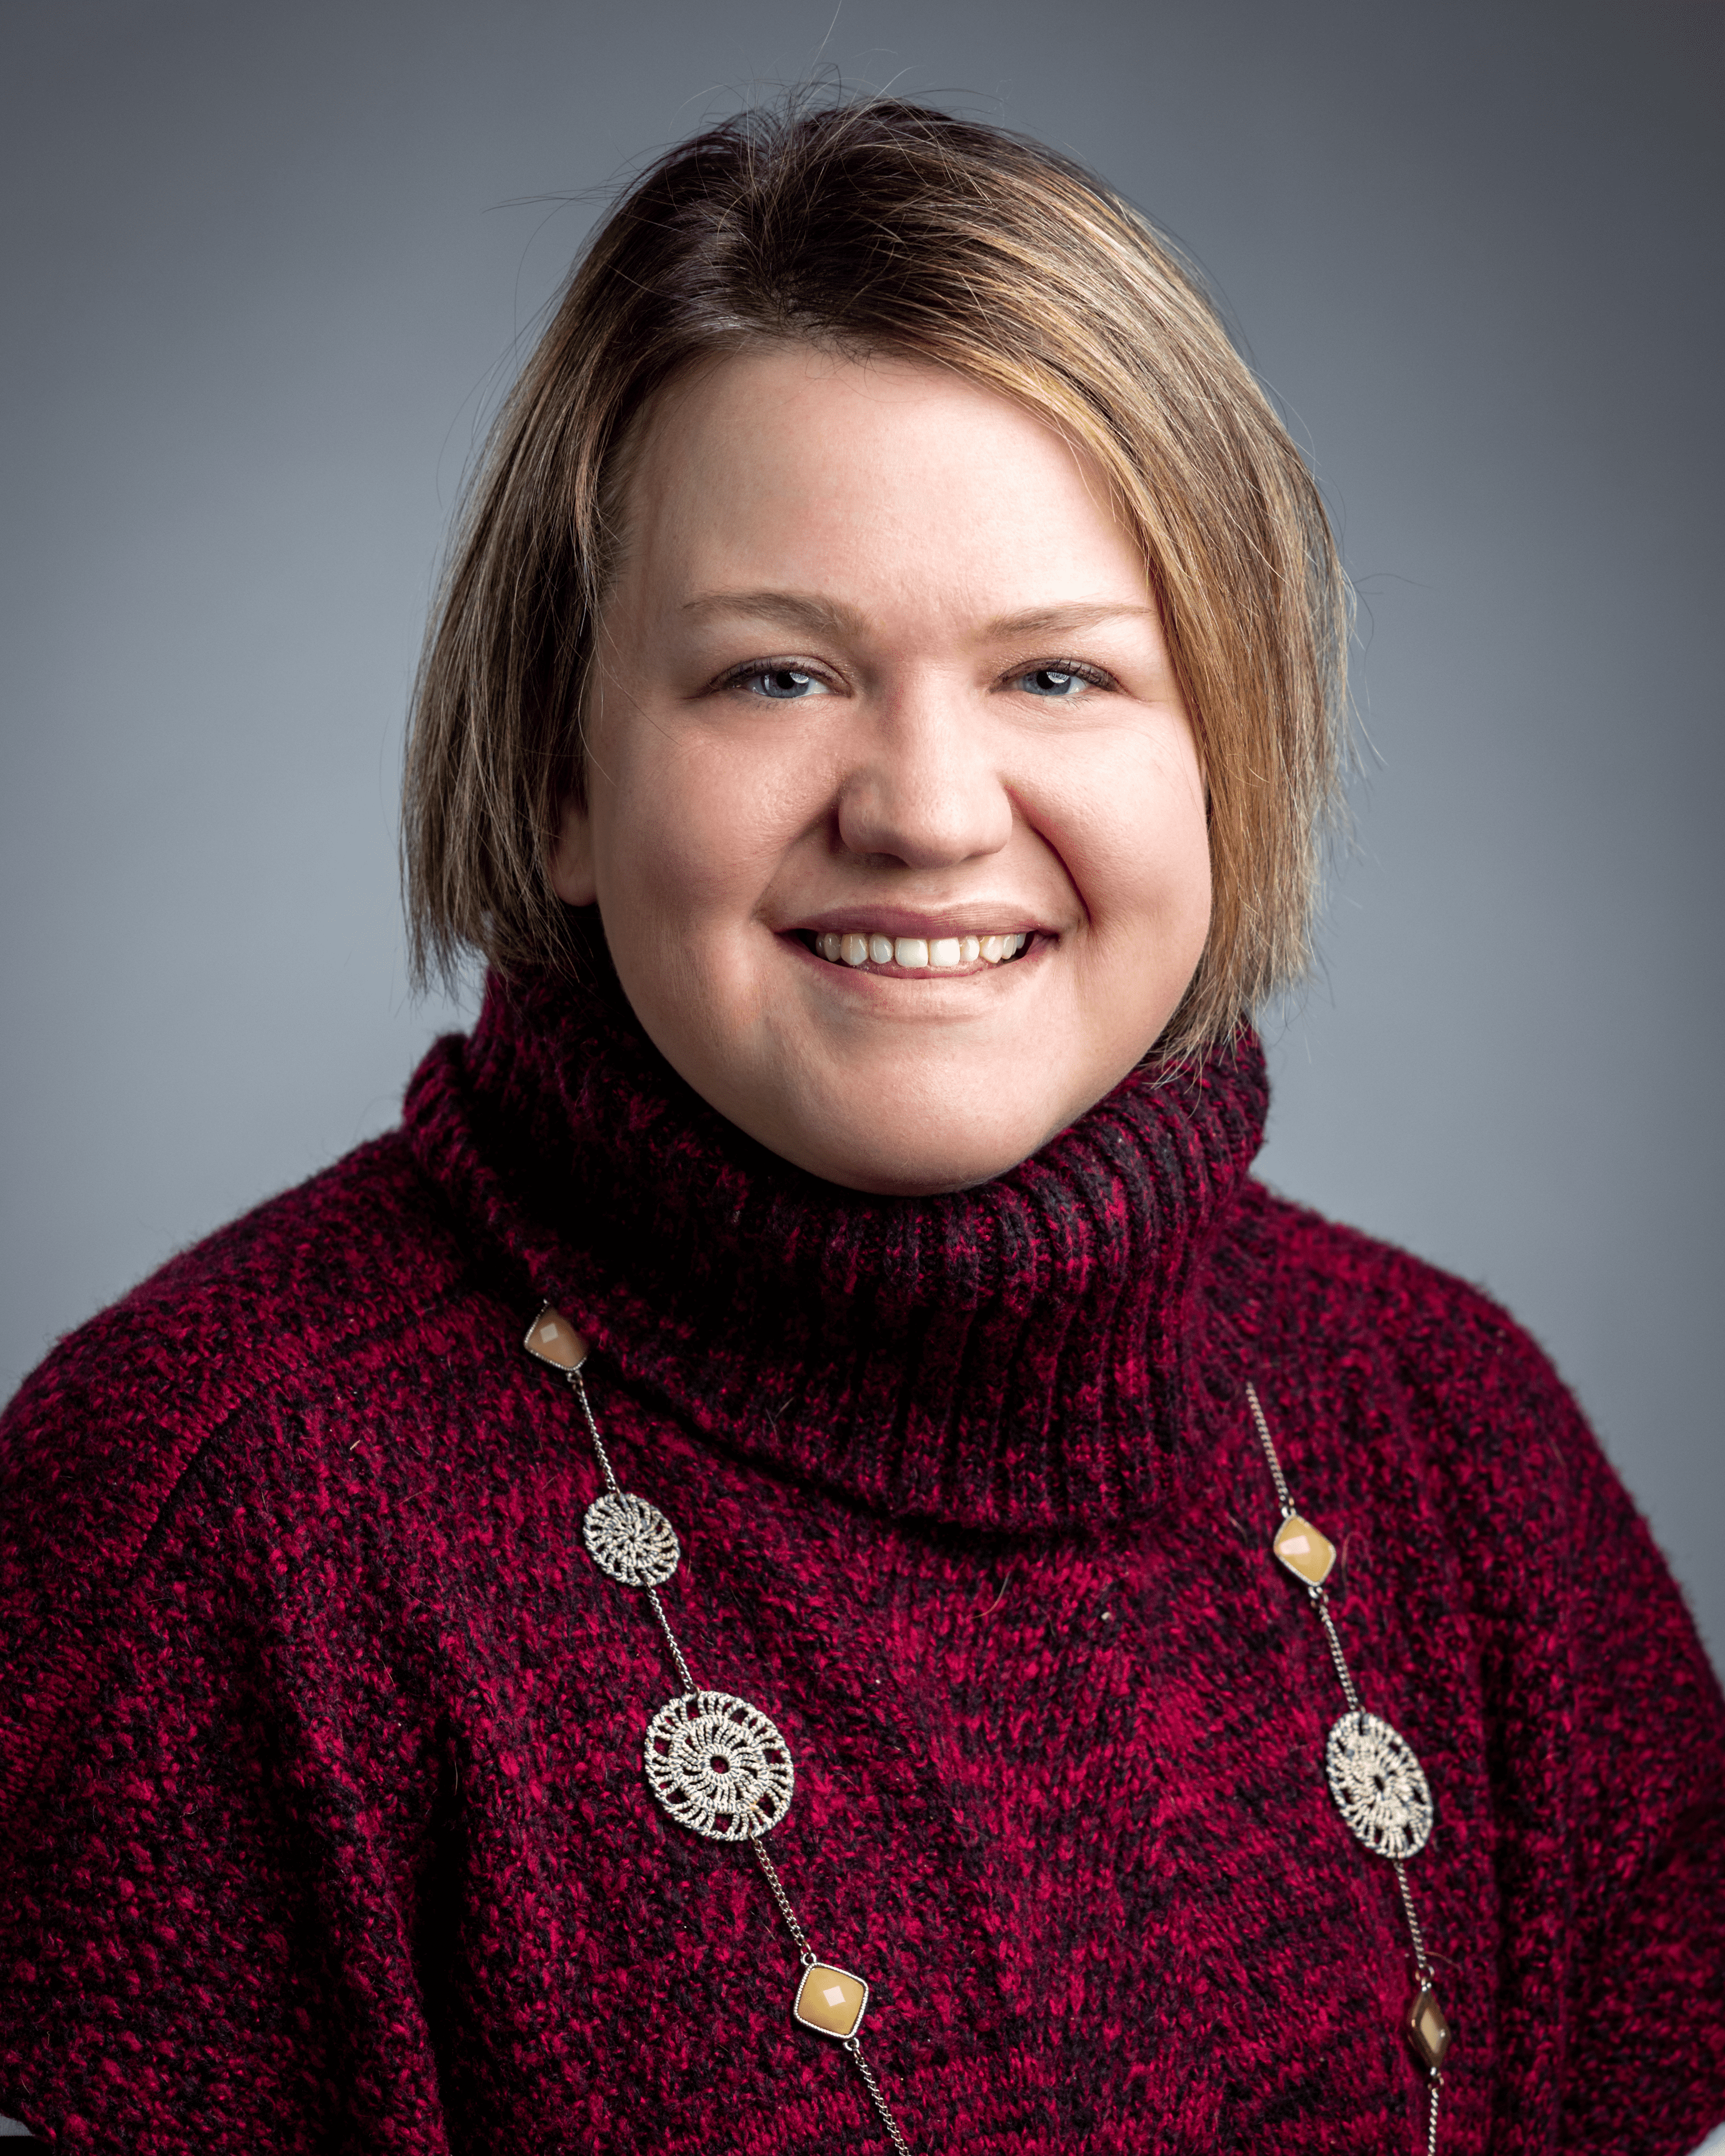 jenniffer McComas in Red Sweater and Necklace Headshot